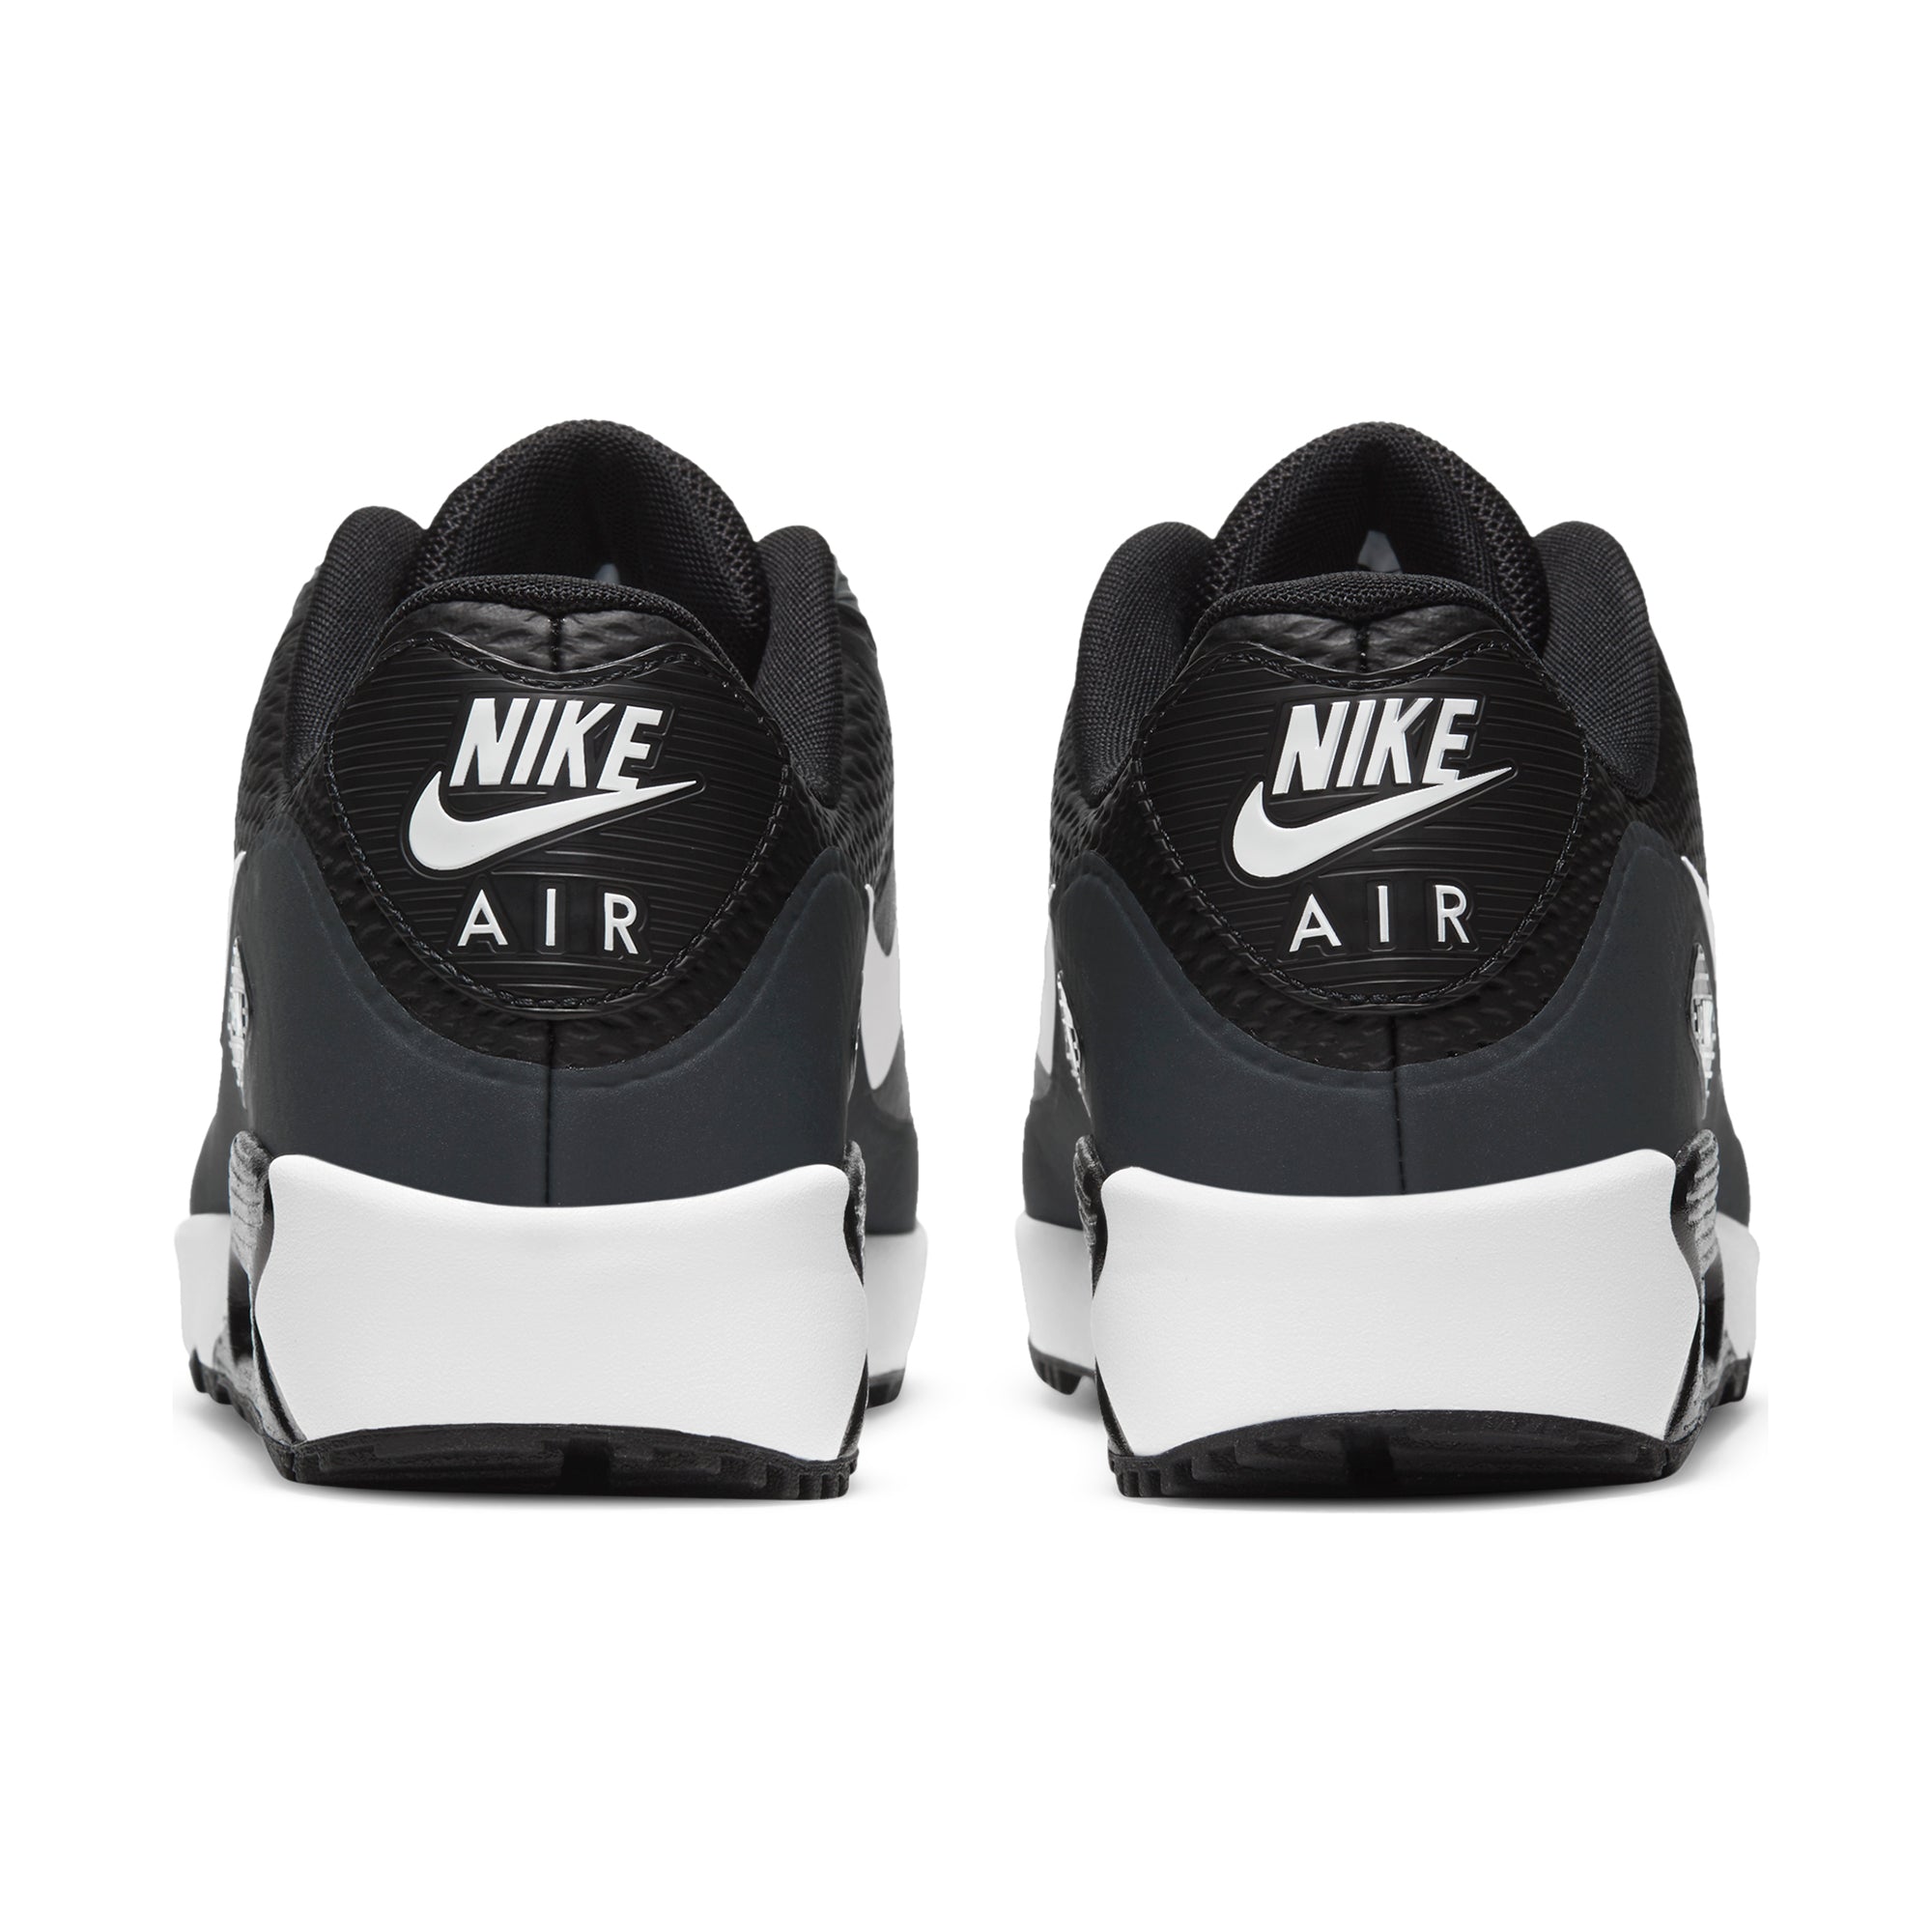 Nike Golf Air Max 90 G Shoes Black White 002 & Function18 | Restrictedgs